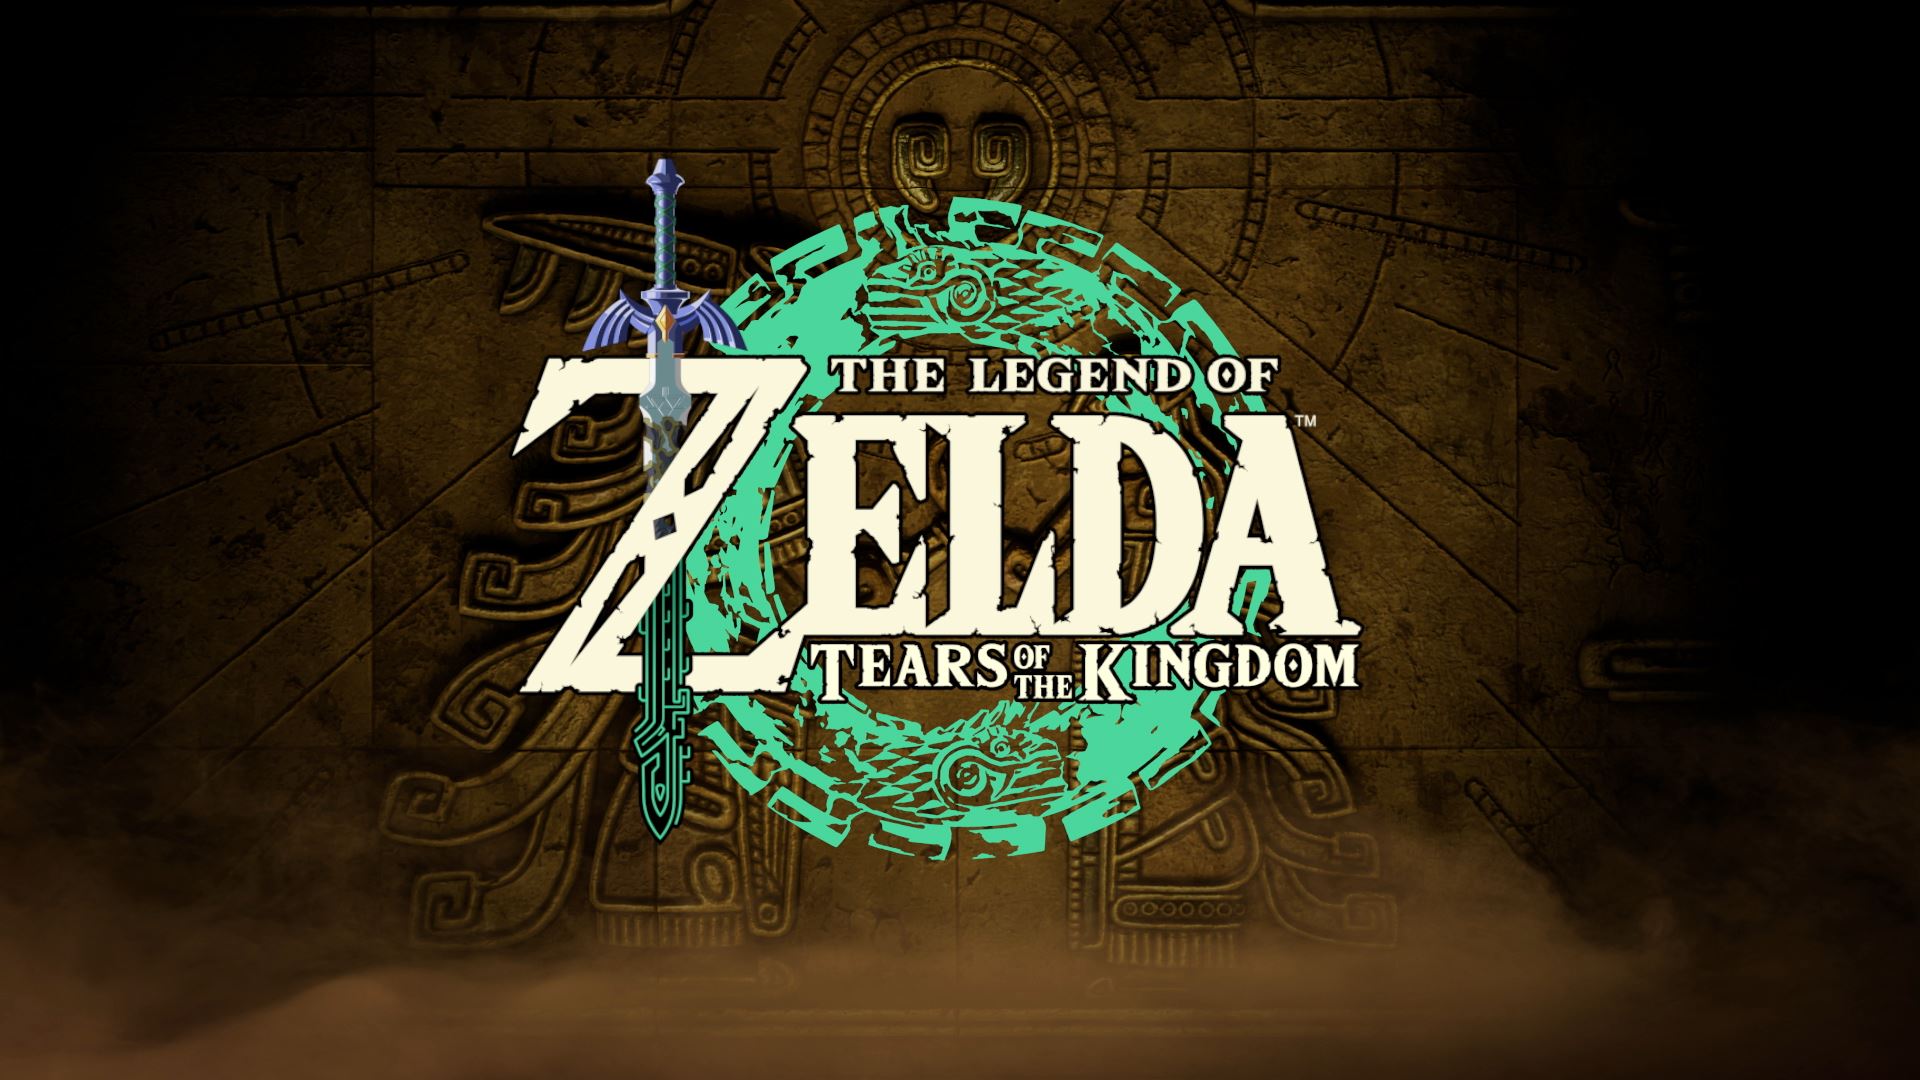 A parent's guide to Legend of Zelda: Tears of the Kingdom